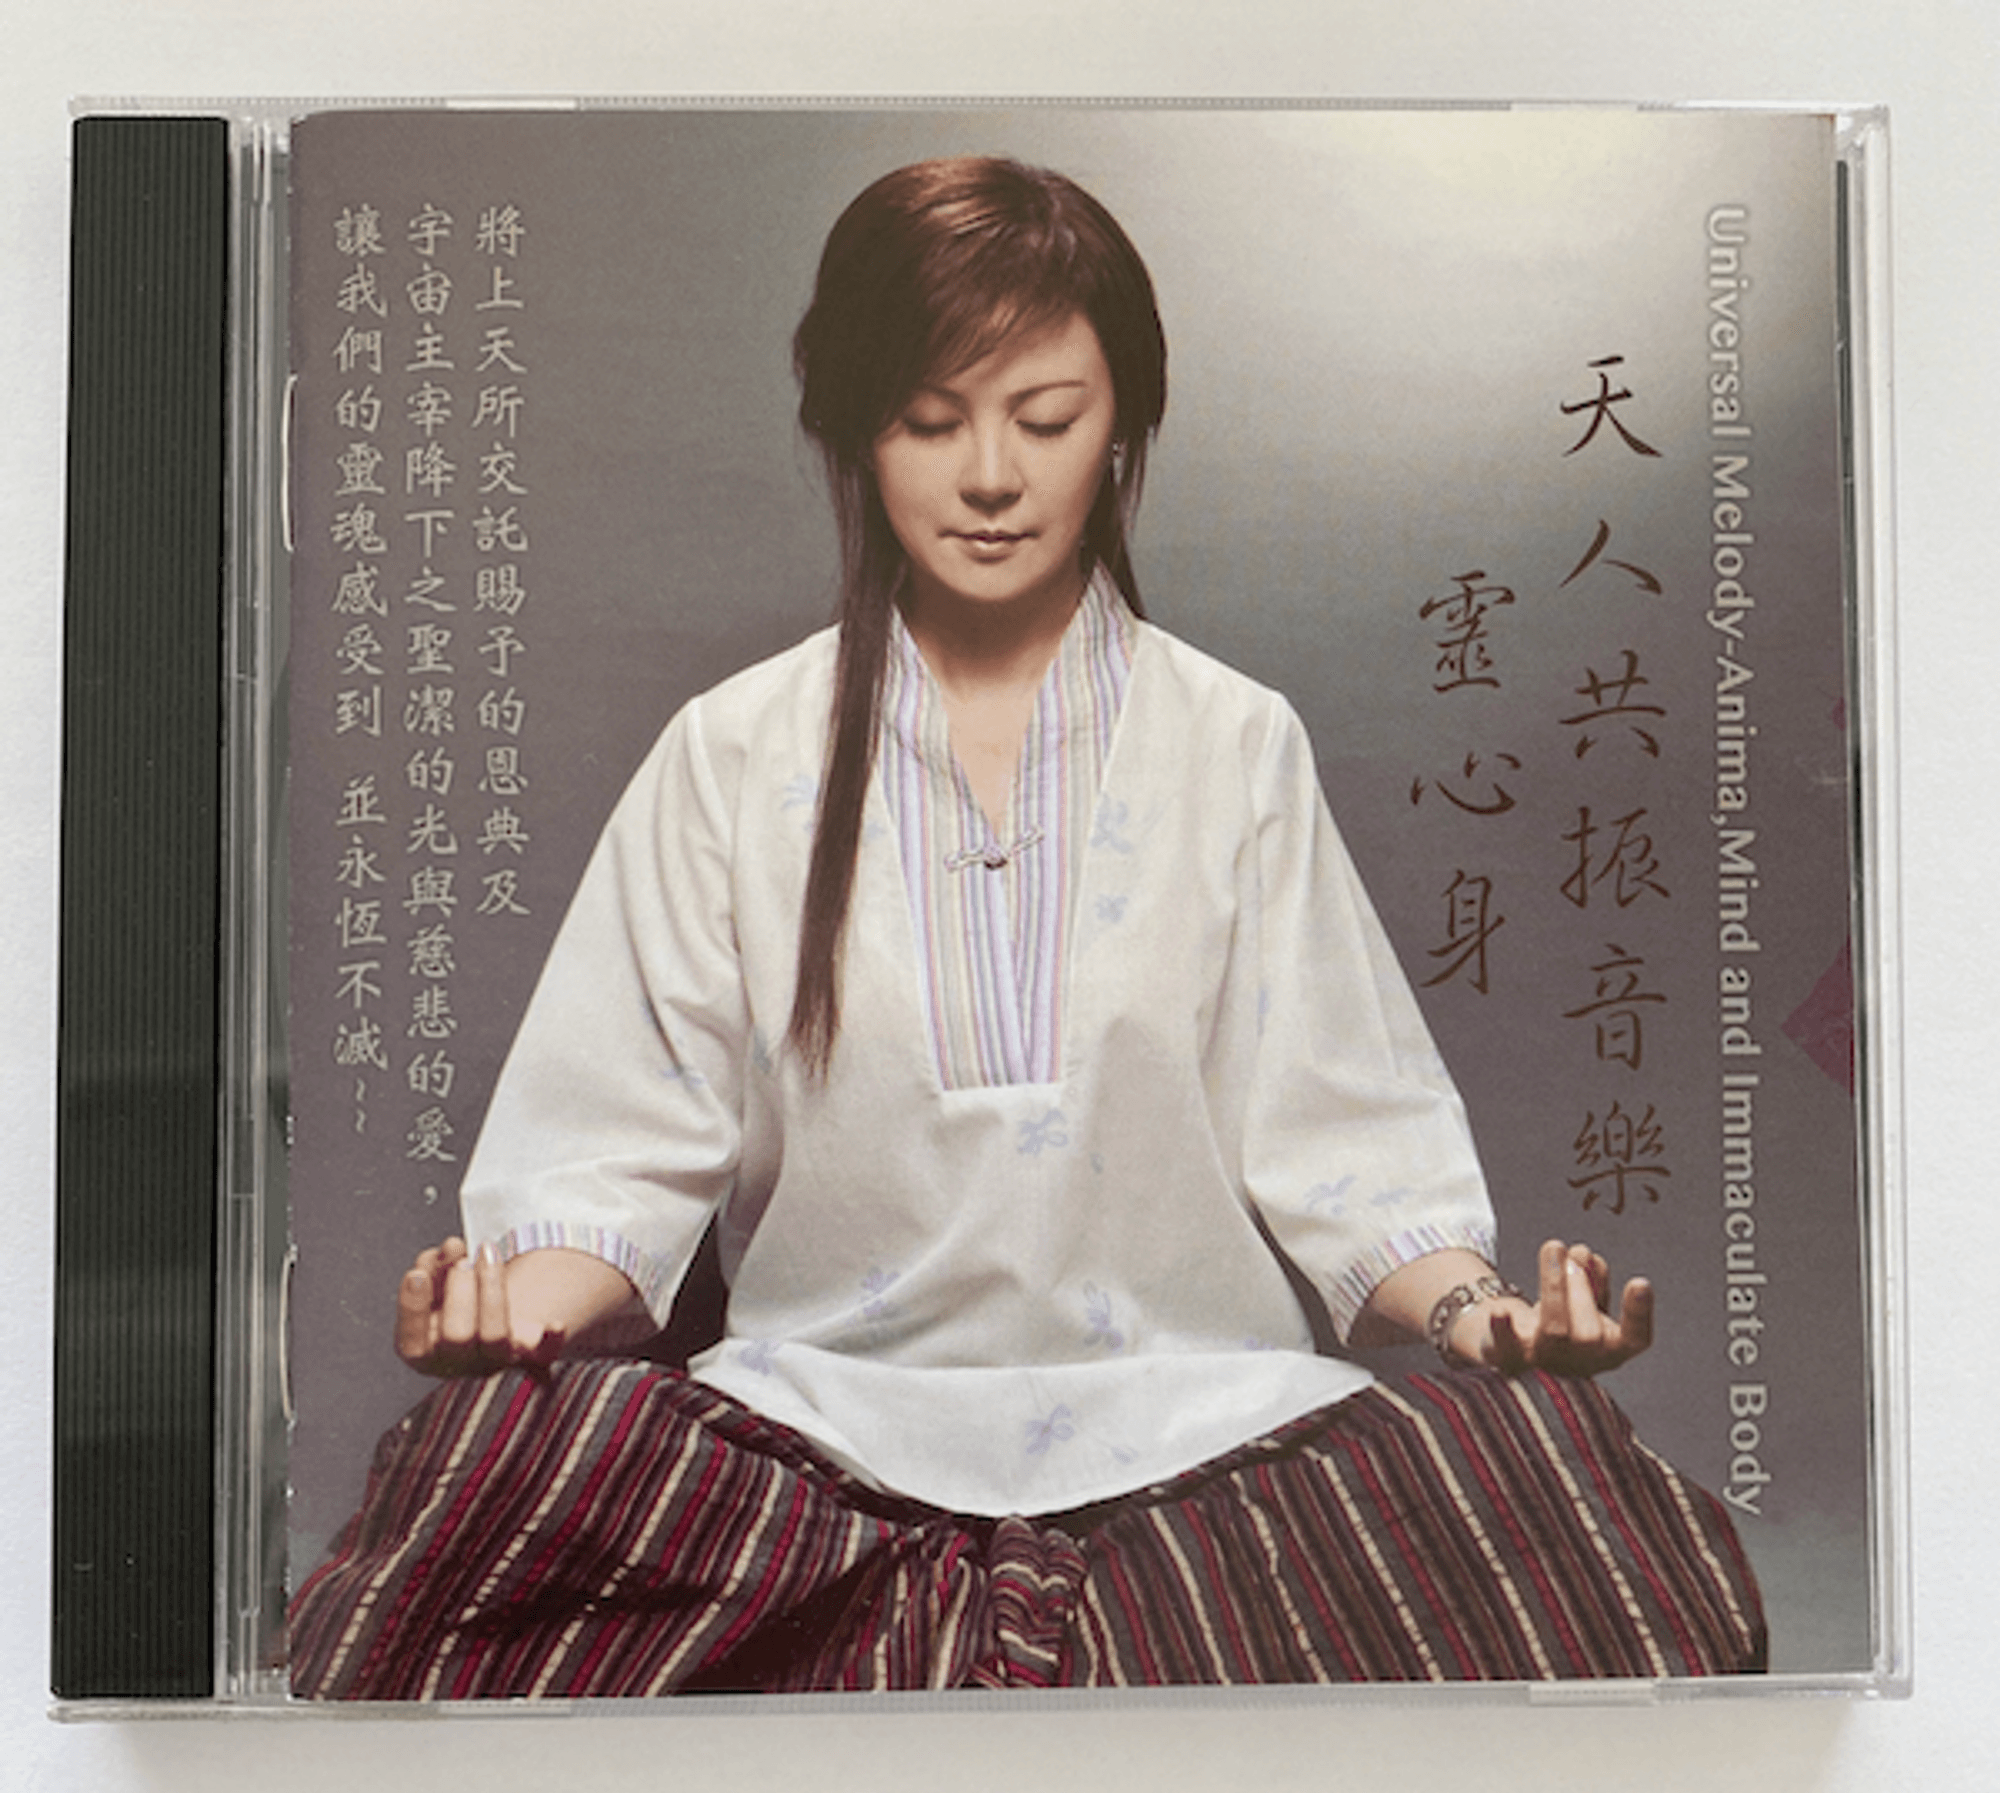 Cover Image for product: 天人共振音樂